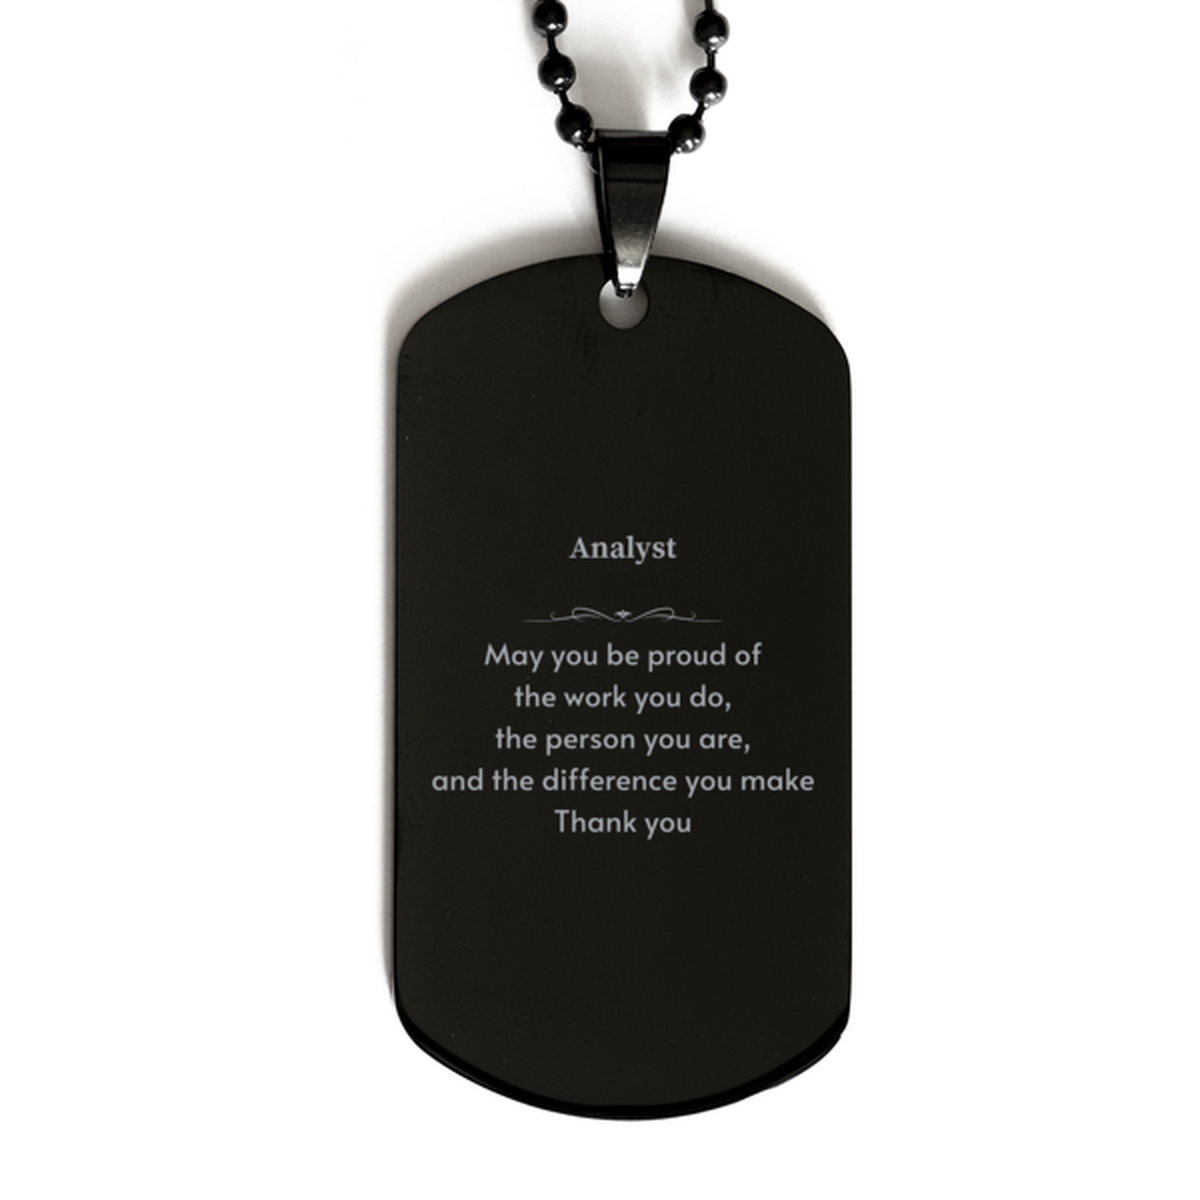 Heartwarming Black Dog Tag Retirement Coworkers Gifts for Analyst, Analyst May You be proud of the work you do, the person you are Gifts for Boss Men Women Friends